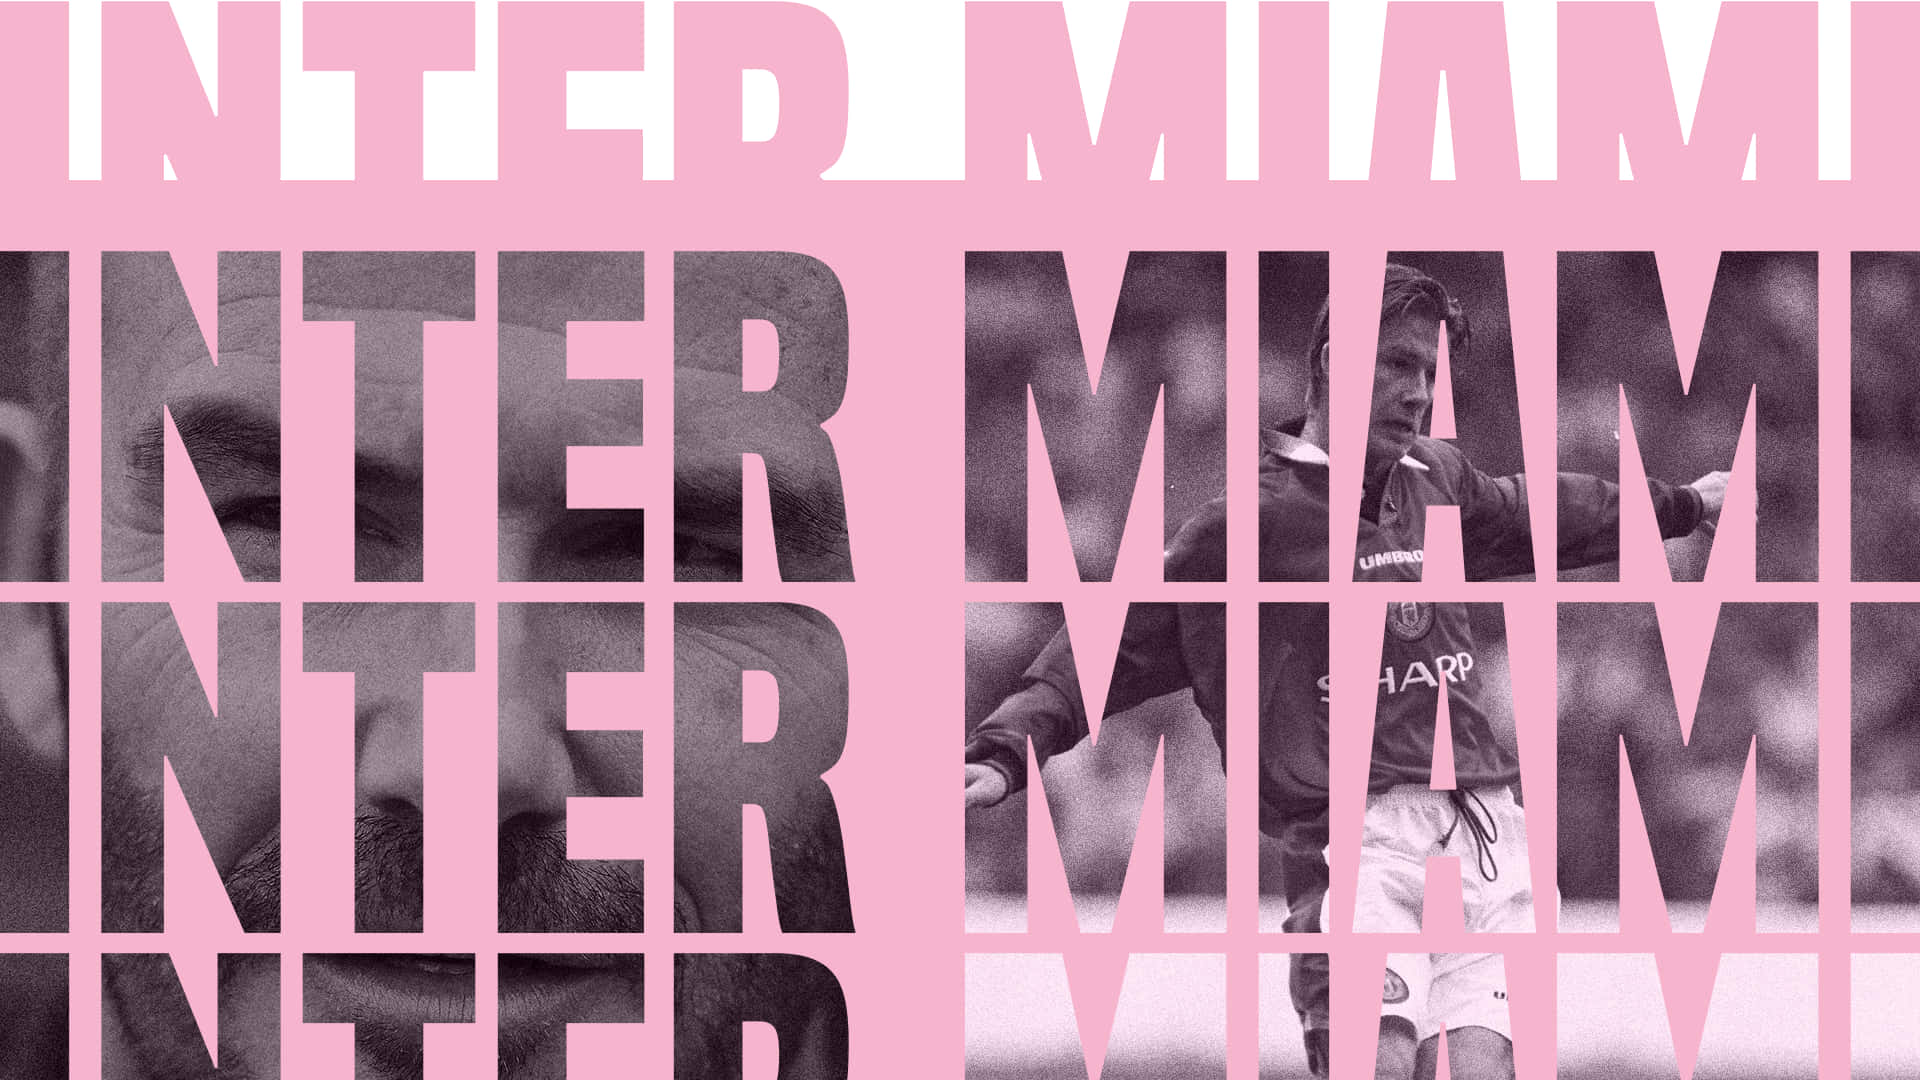 Exciting Inter Miami FC Typography Art Wallpaper